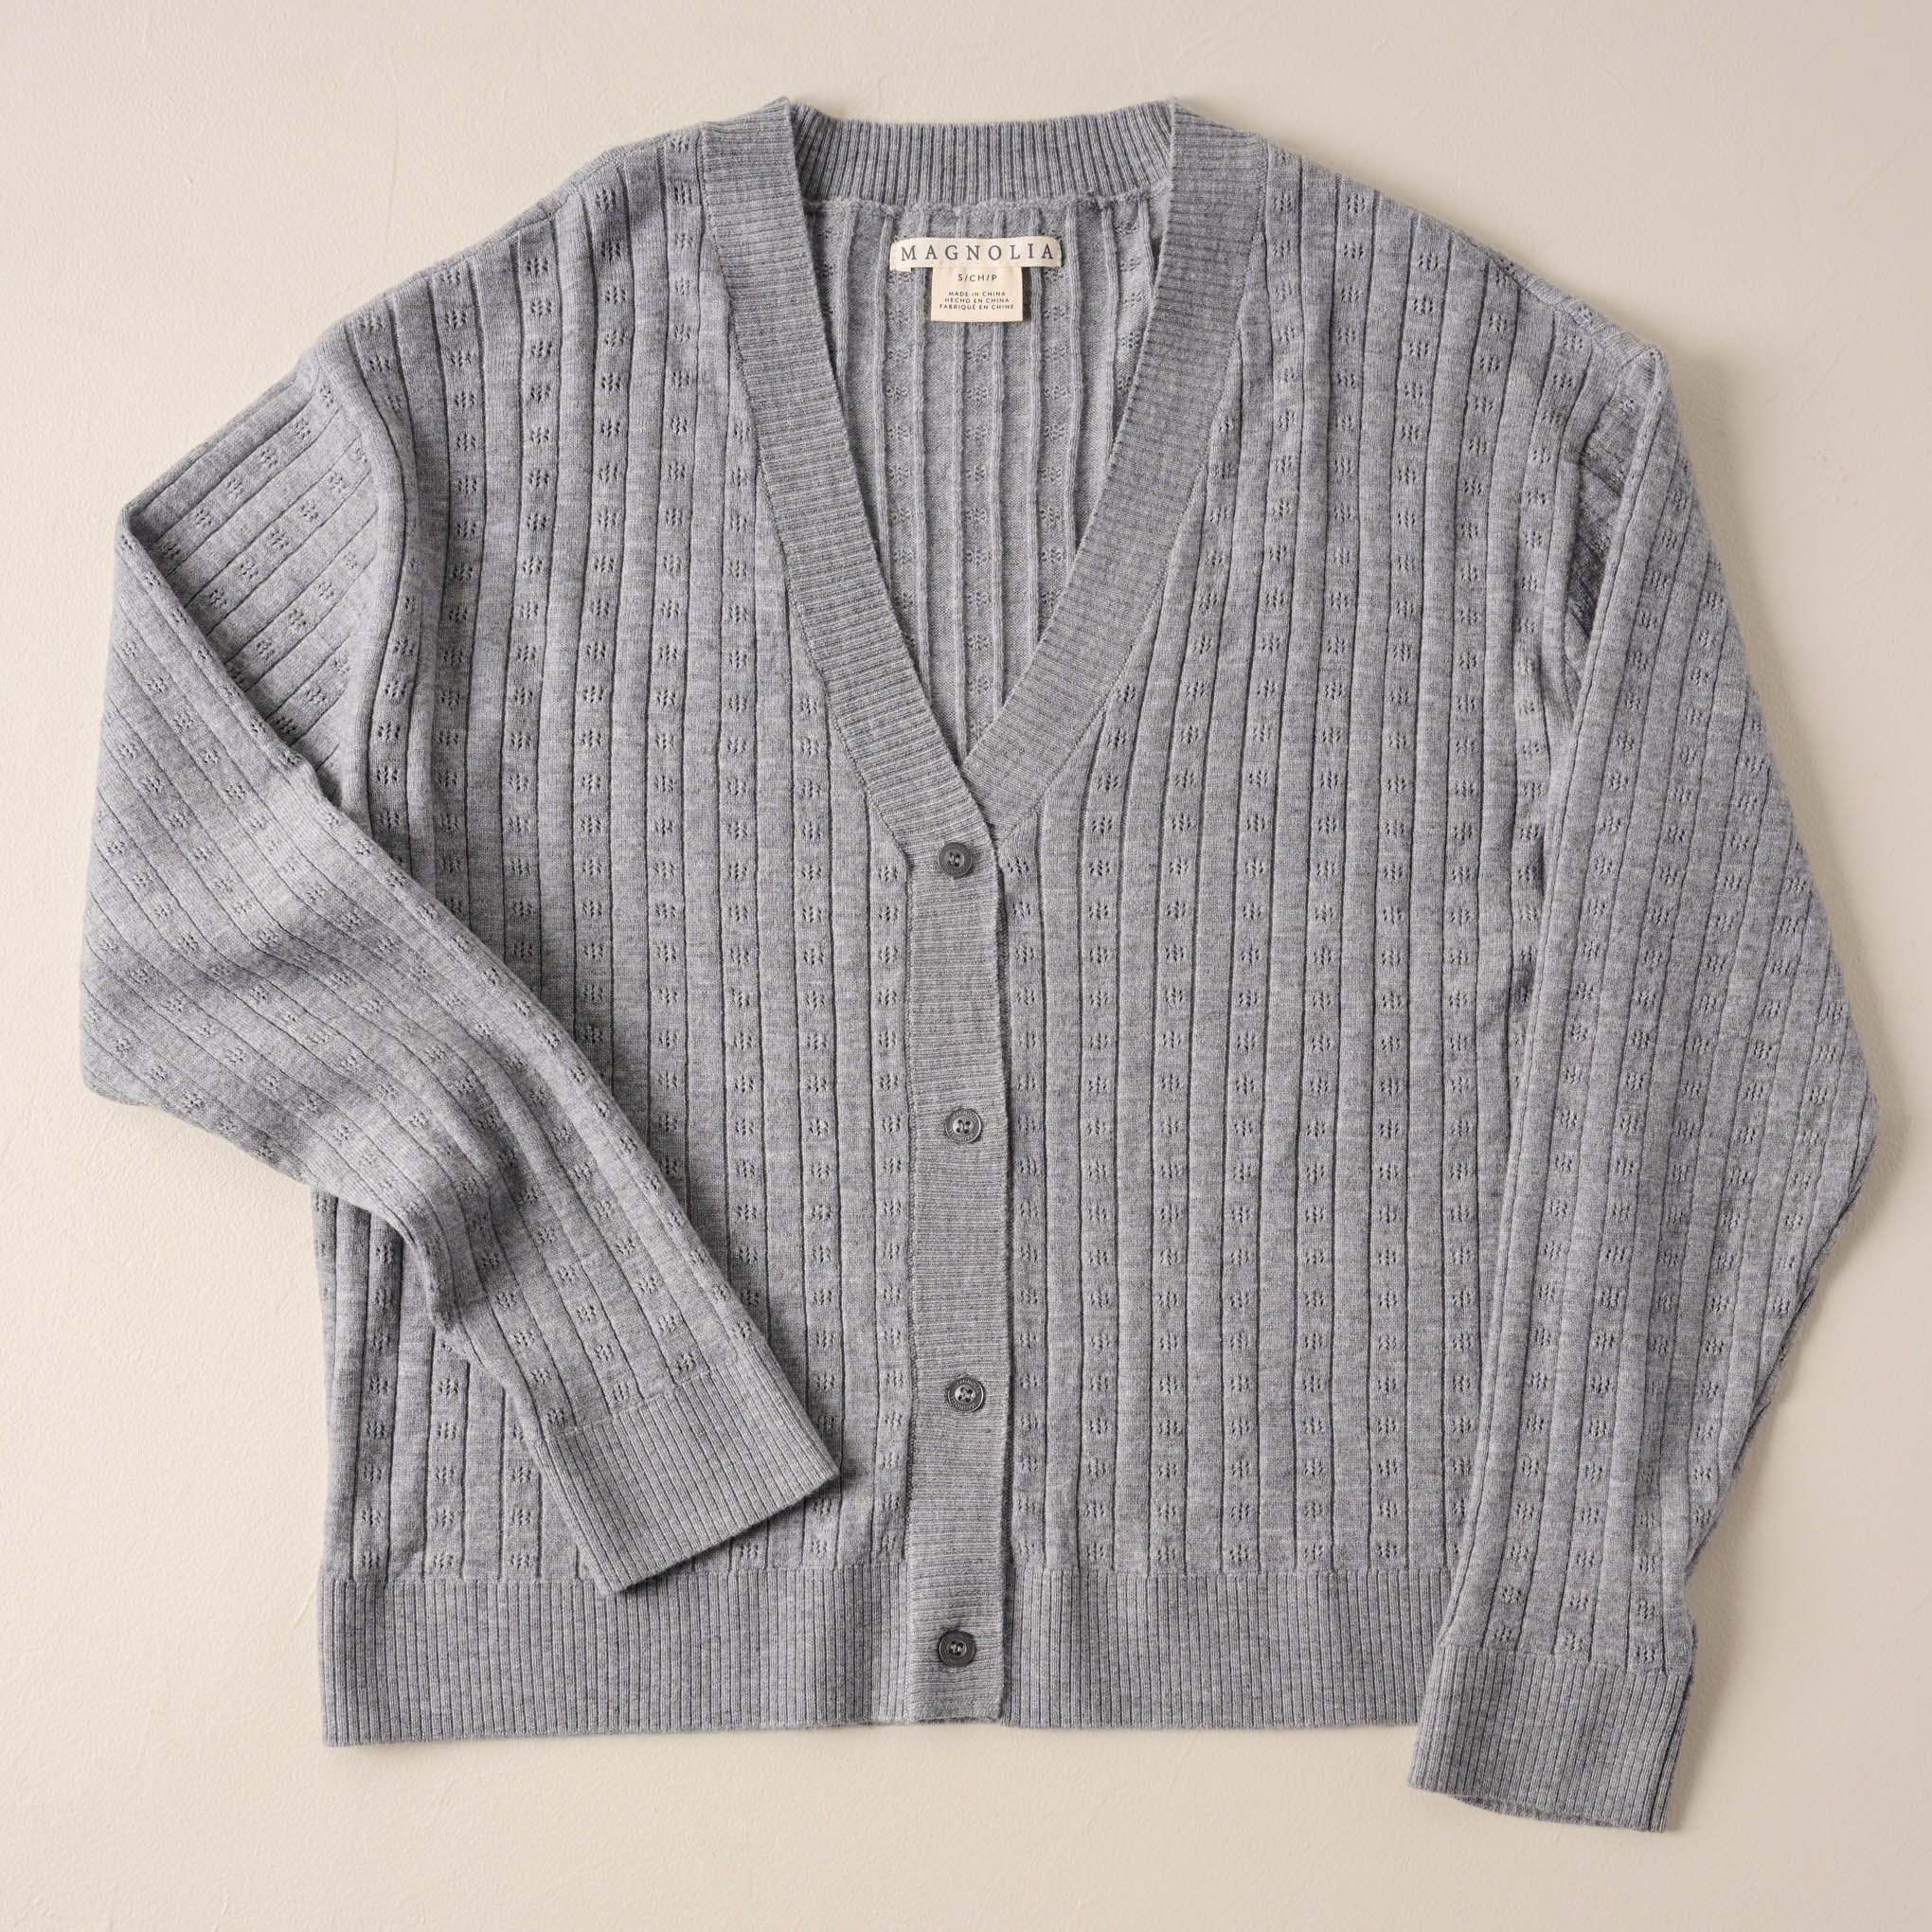 Pointelle French Grey Cardigan On sale for $54.40, discounted from $68.00